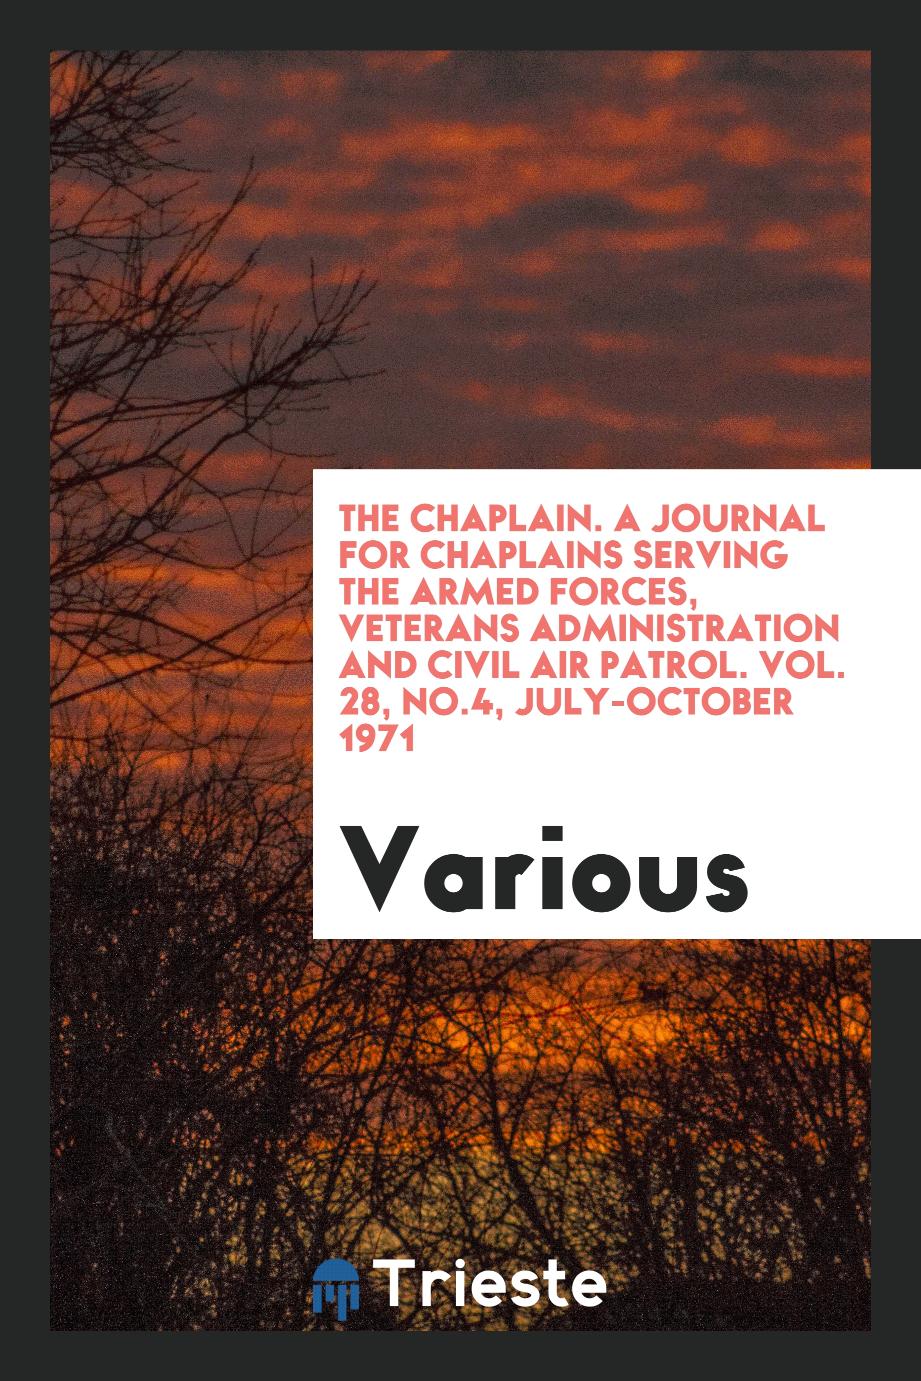 The Chaplain. A journal for chaplains serving the armed forces, veterans administration and civil air patrol. Vol. 28, No.4, July-October 1971